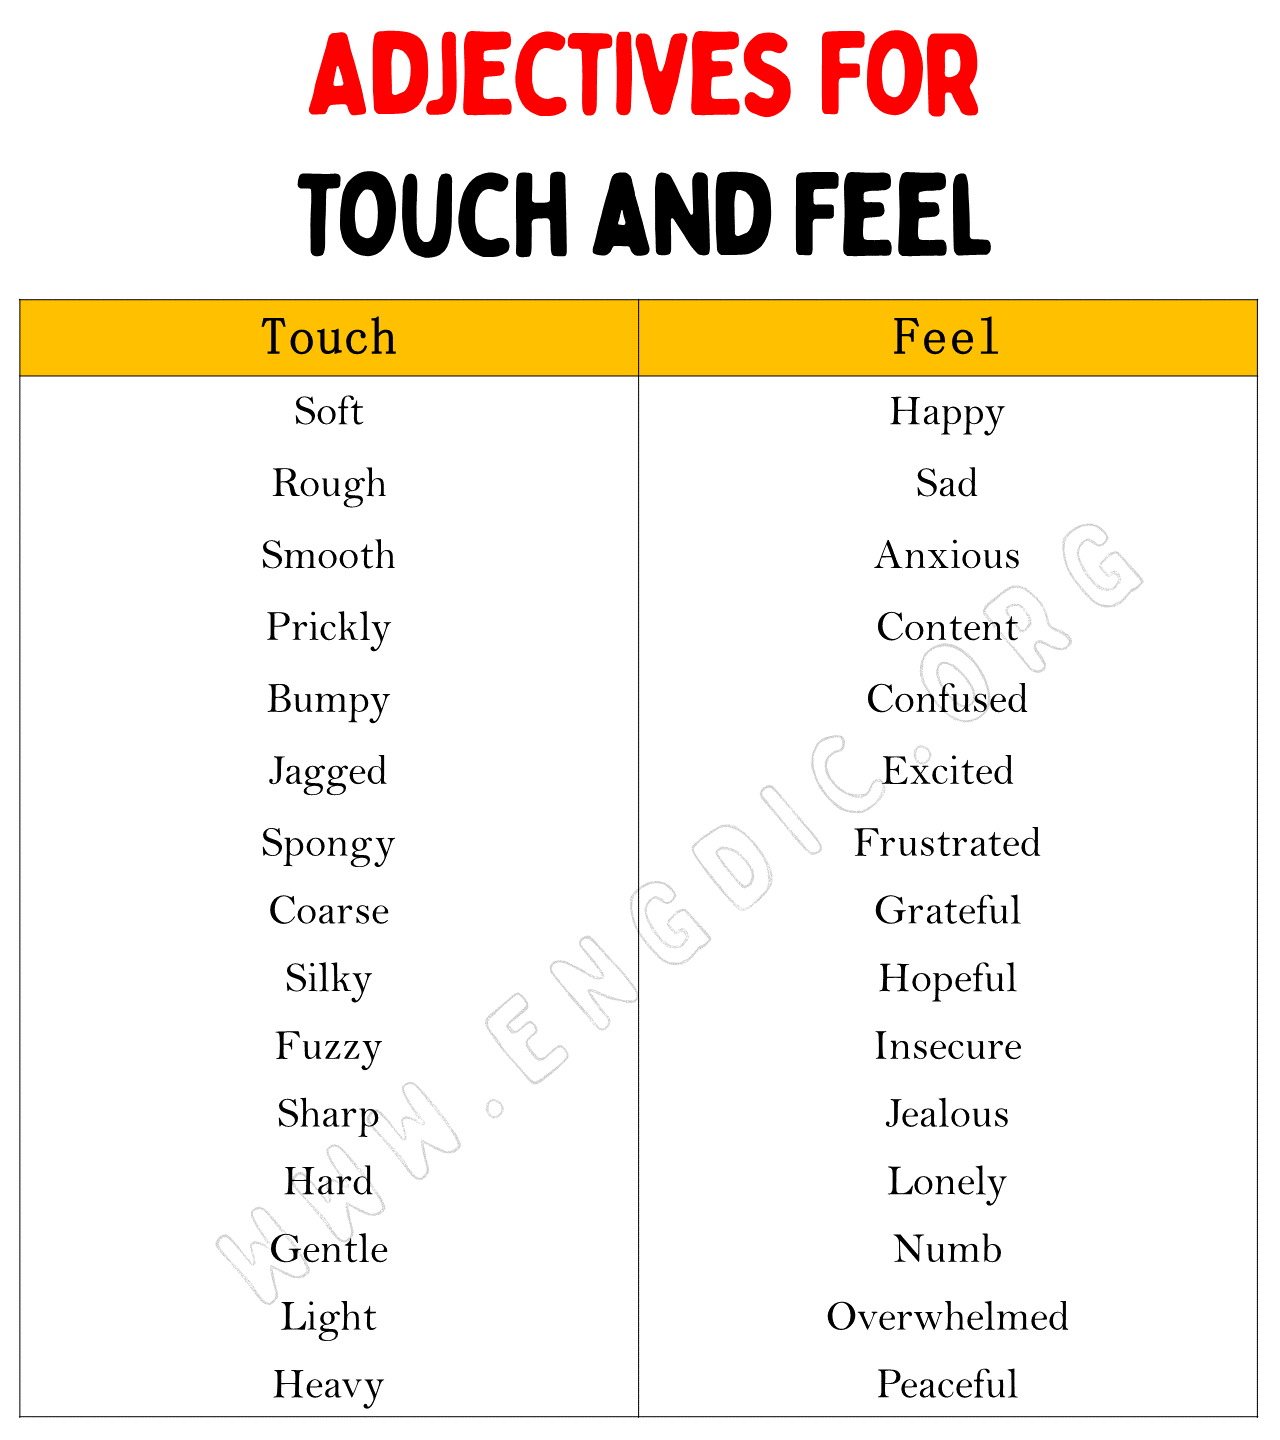 List of Adjectives for Touch and Feel